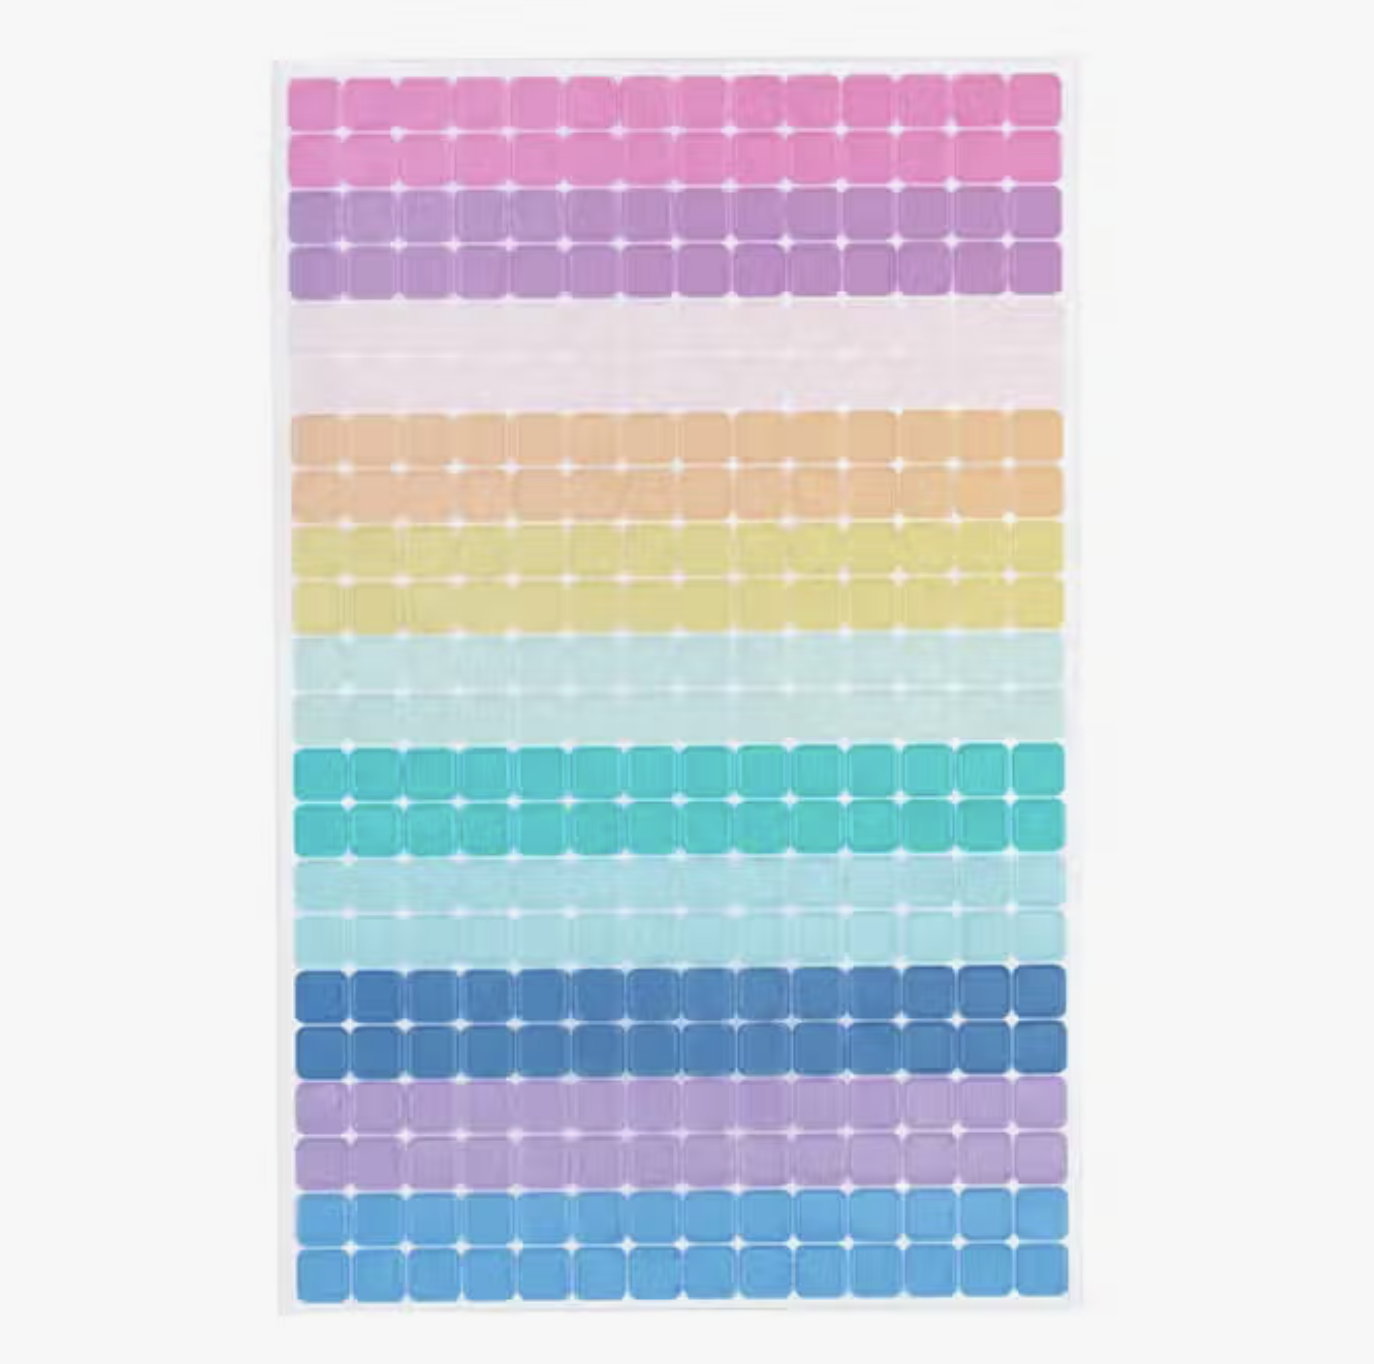 Stay organized and vibrant with our Colorful Square Planner Sticker Pack. This pack features an assortment of square-shaped stickers in a variety of bright colors, perfect for adding a pop of color and functionality to your planner. These Erin Condren Stickers are sold at BBB Supplies Craft Shop. 